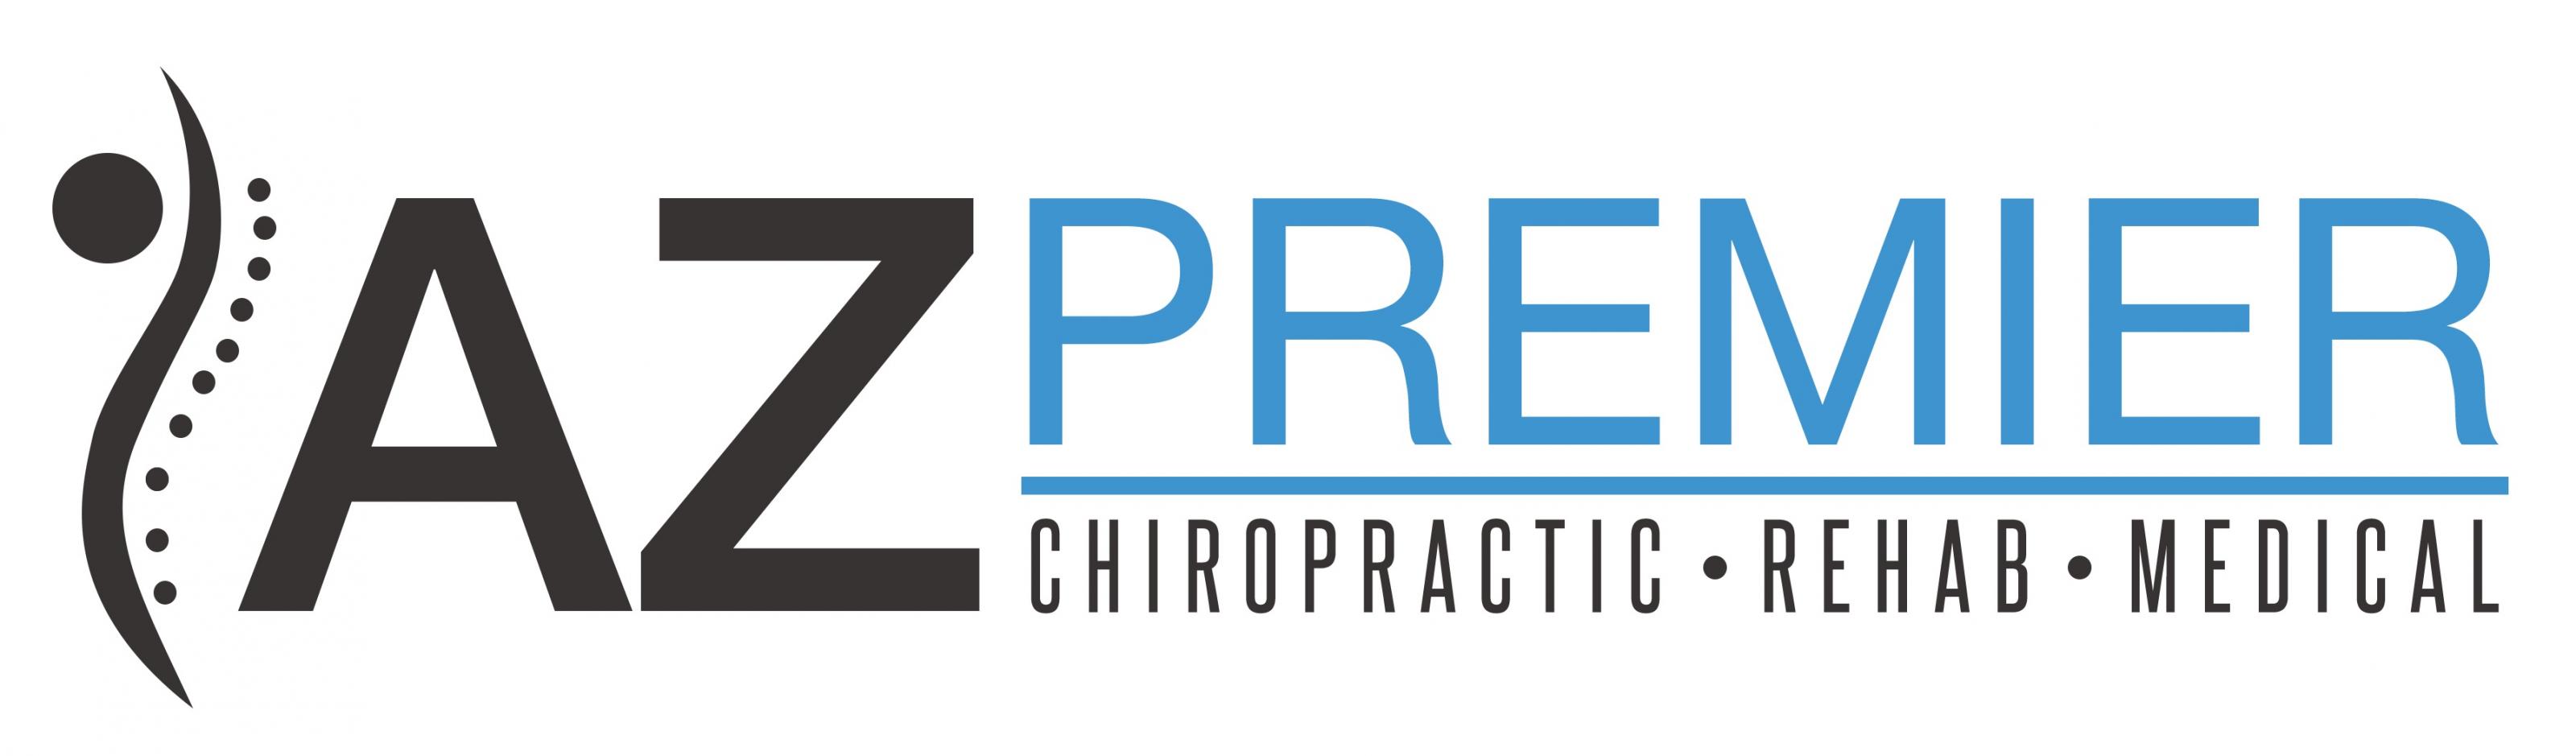 AZ Premier Chiropractic and Rehab Helps Regain Mobility